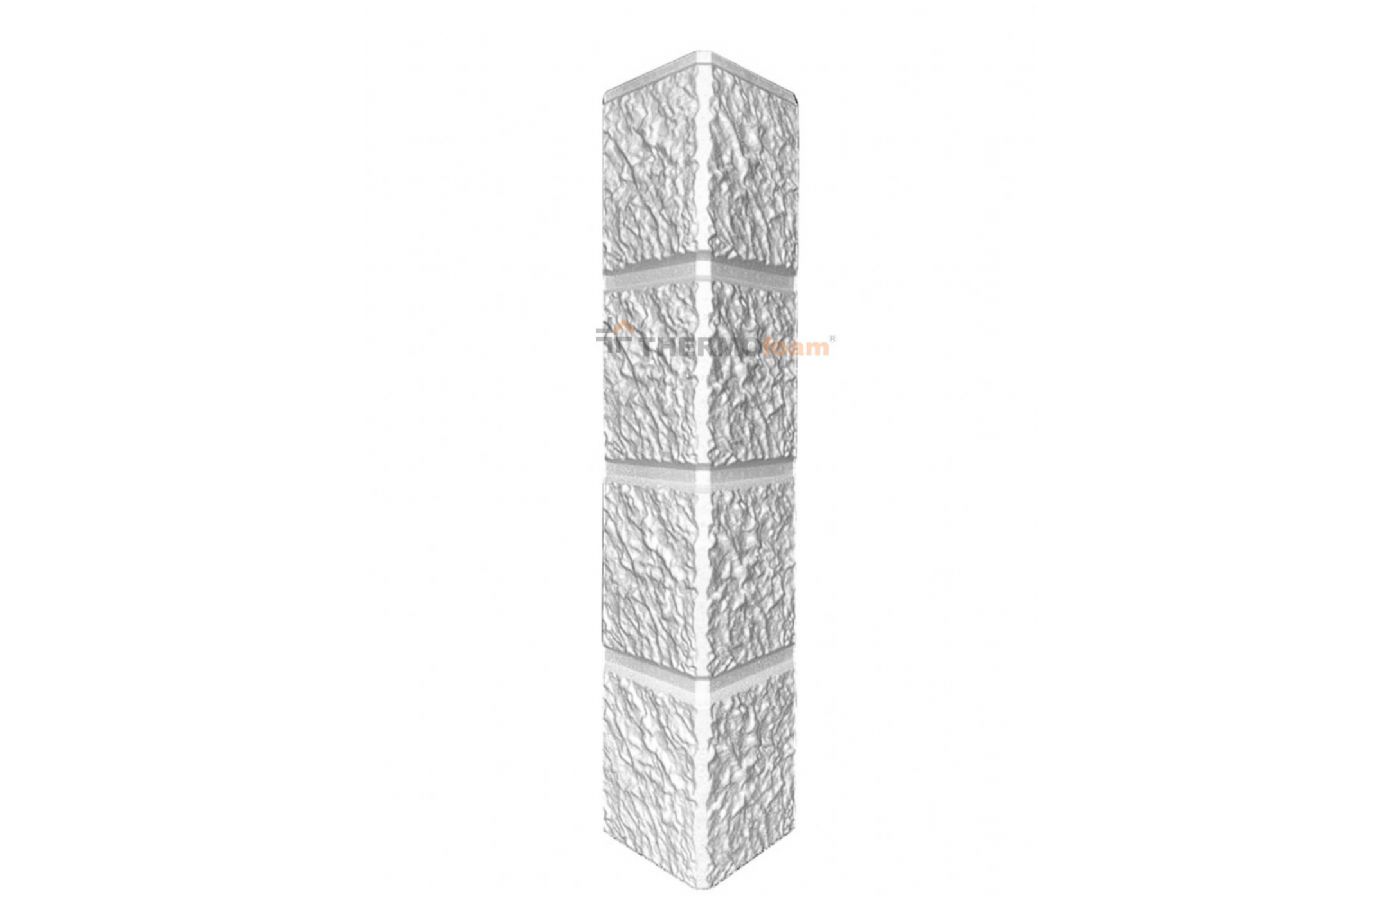 Asymmetric Straight Pattern Squinted Injection Corner Stone